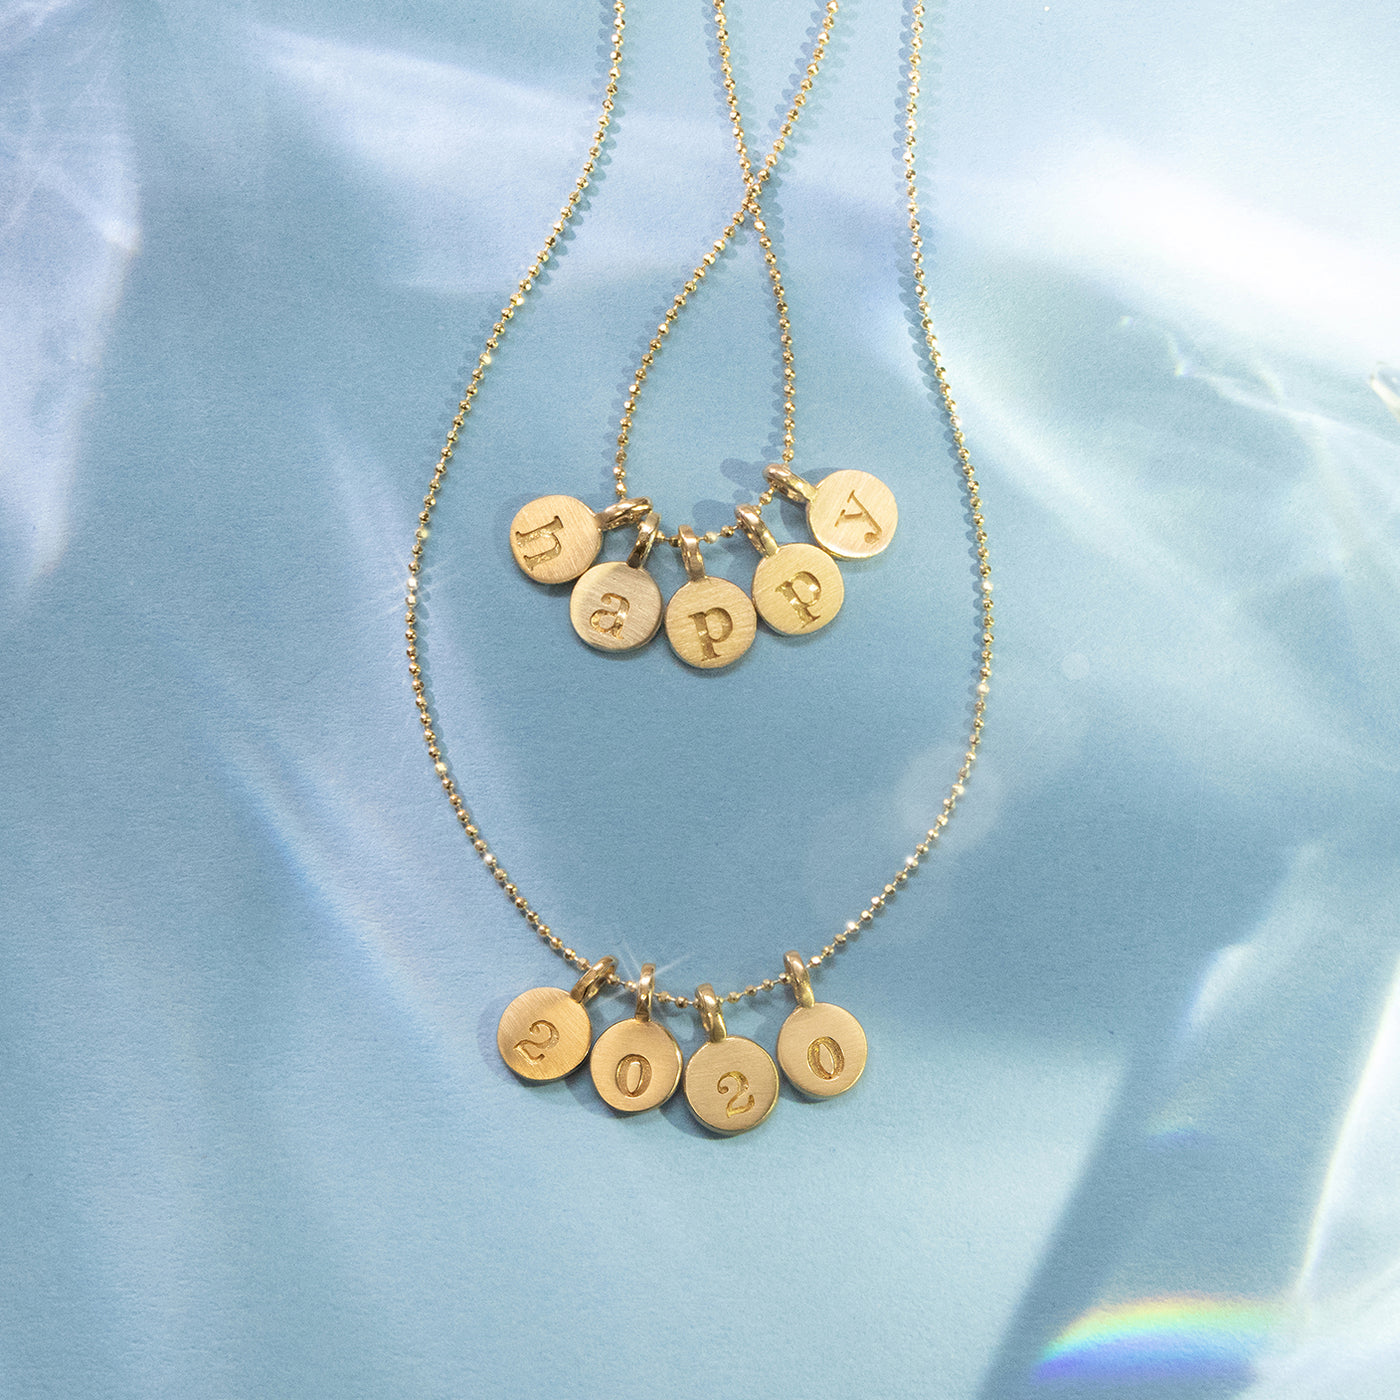 Alex Woo Letters (A-Z) Mini Additions™ Charm Necklace